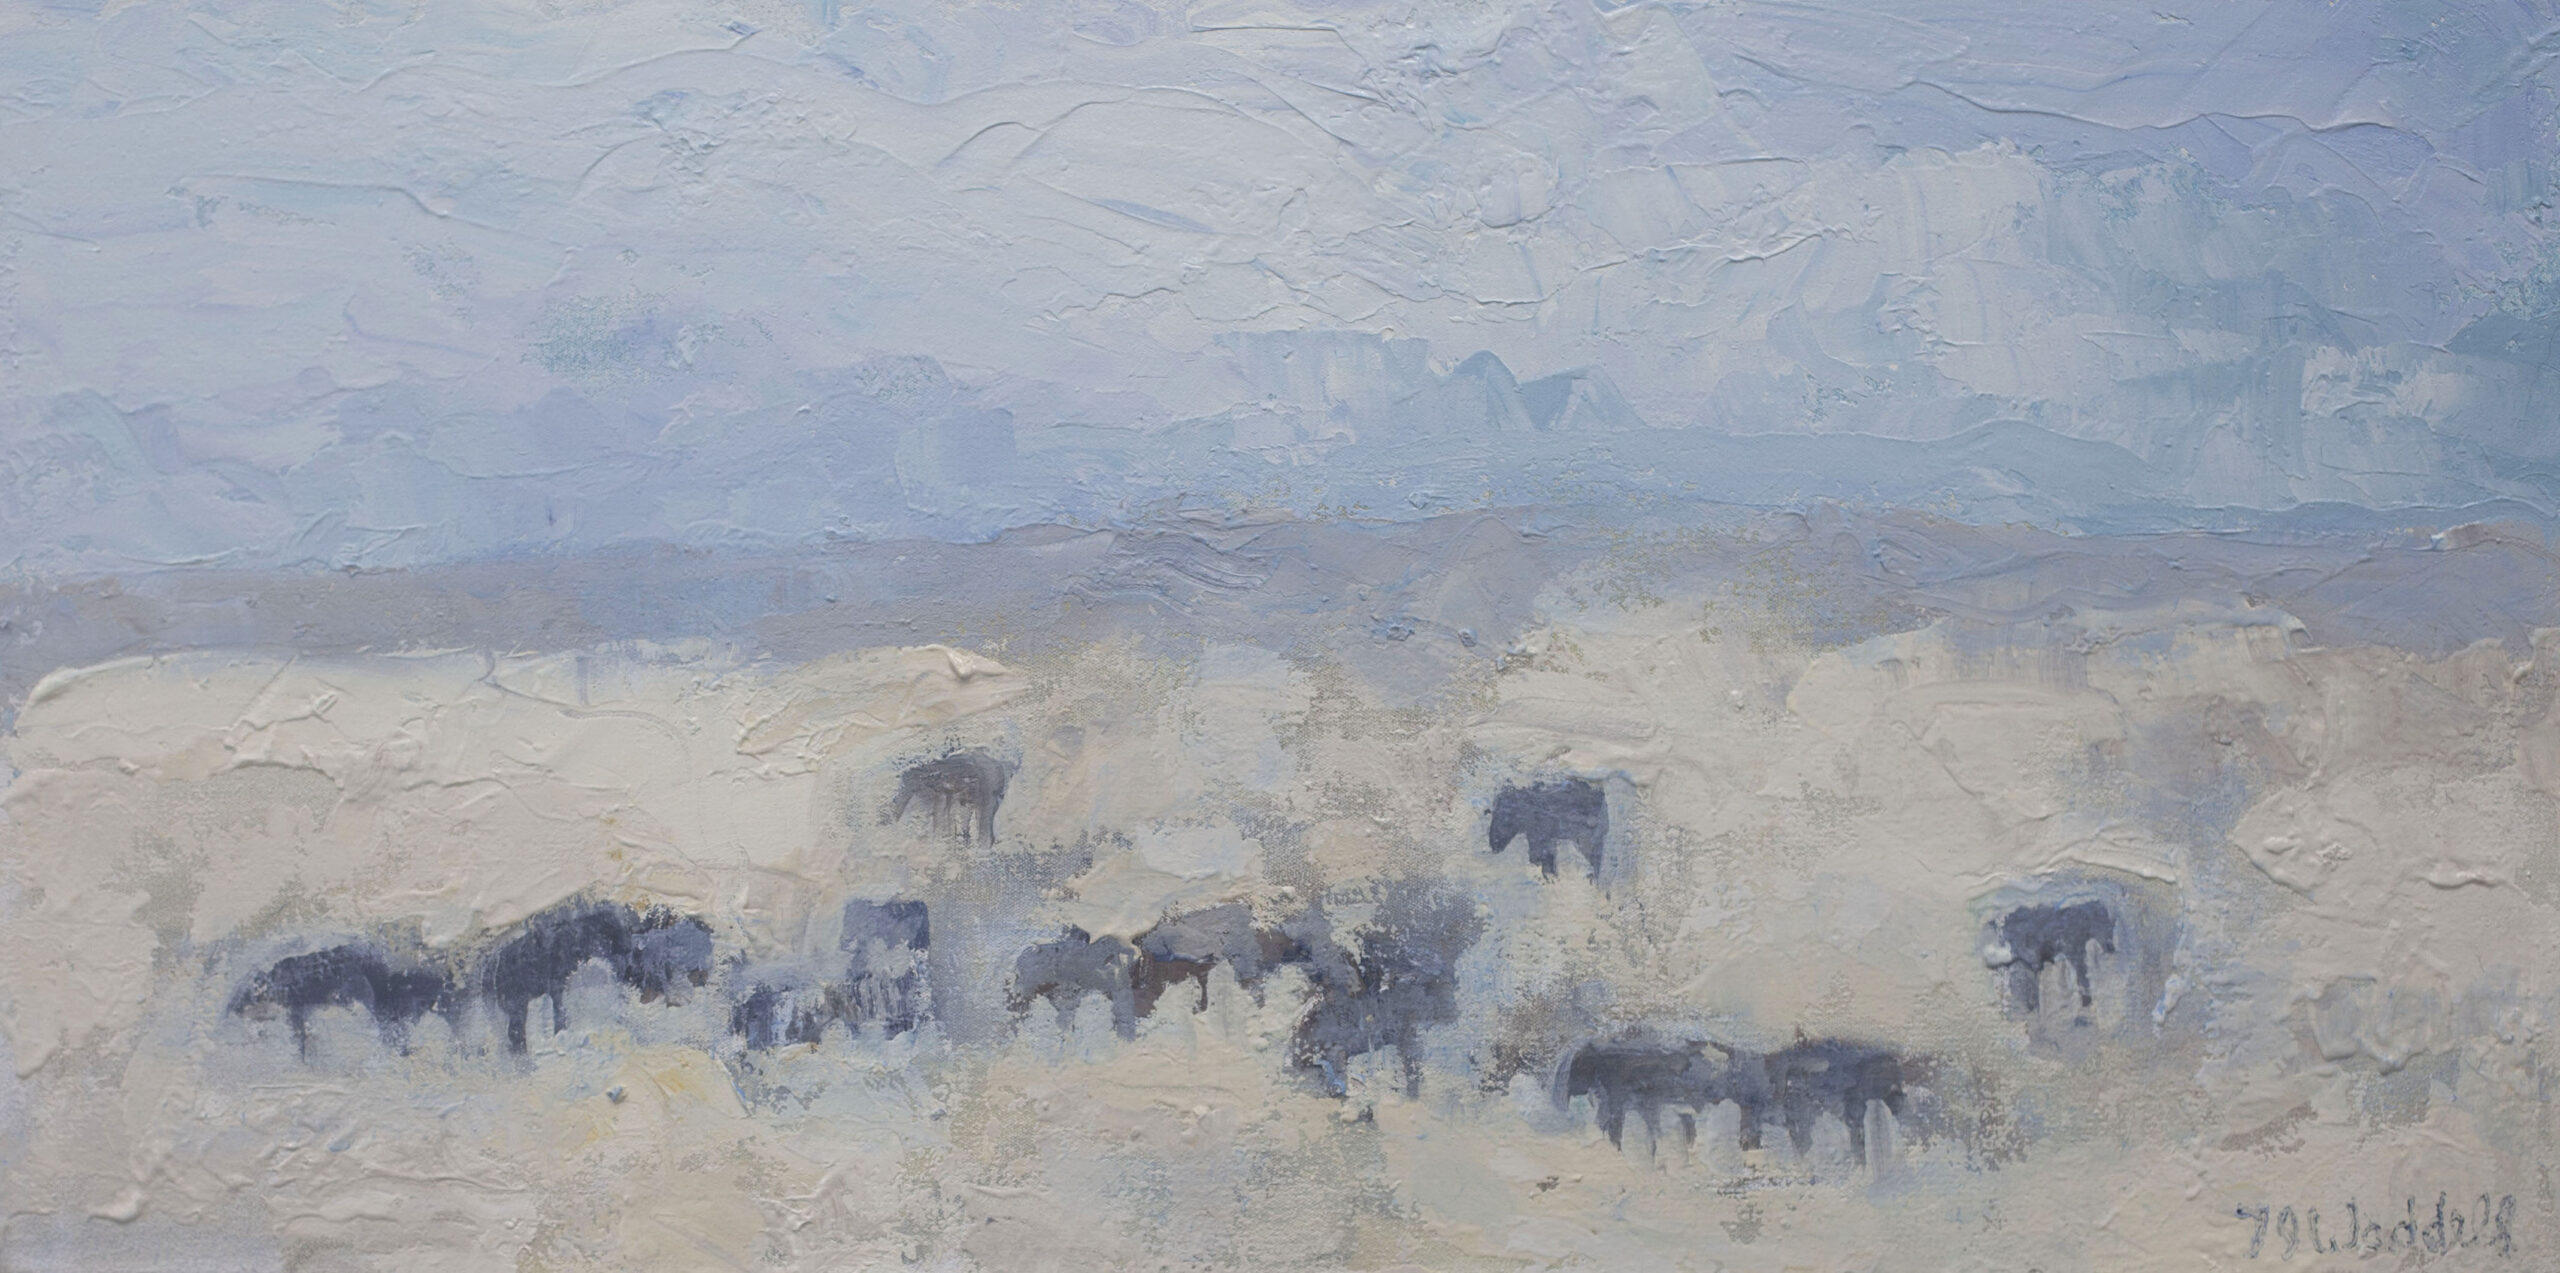 
							

									Theodore Waddell									Lewistown Horses #3 									oil and encaustic on canvas<br />
18 x 36 inches									


							